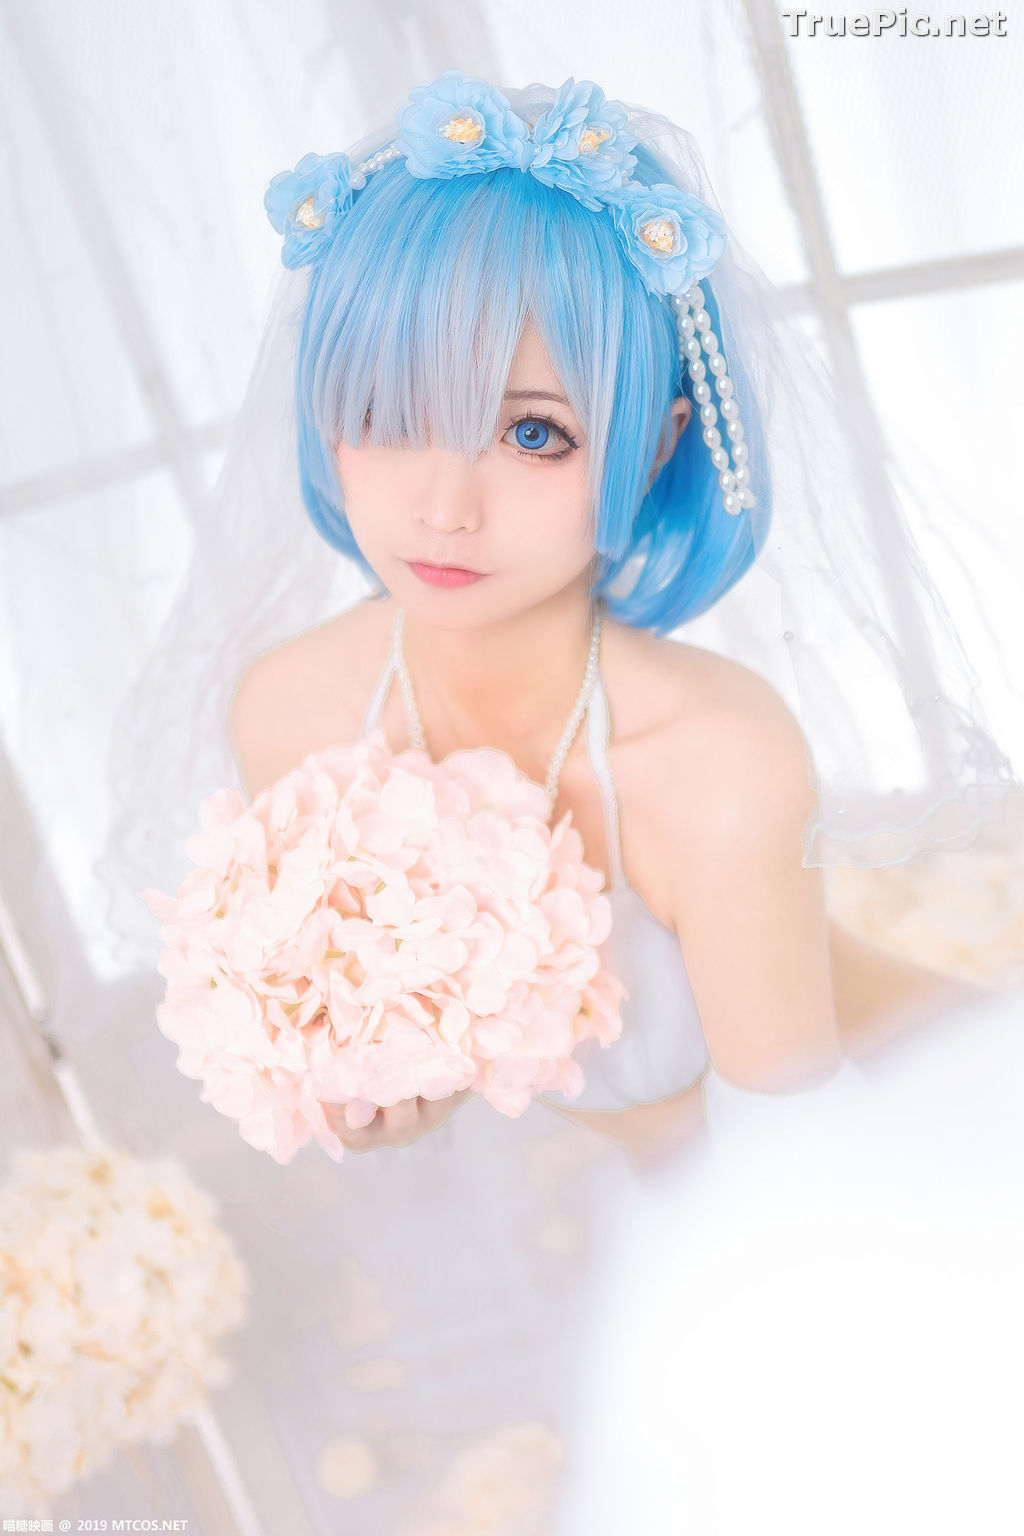 Image [MTCos] 喵糖映画 Vol.029 – Chinese Cute Model – Bride Rem Cosplay - TruePic.net - Picture-3